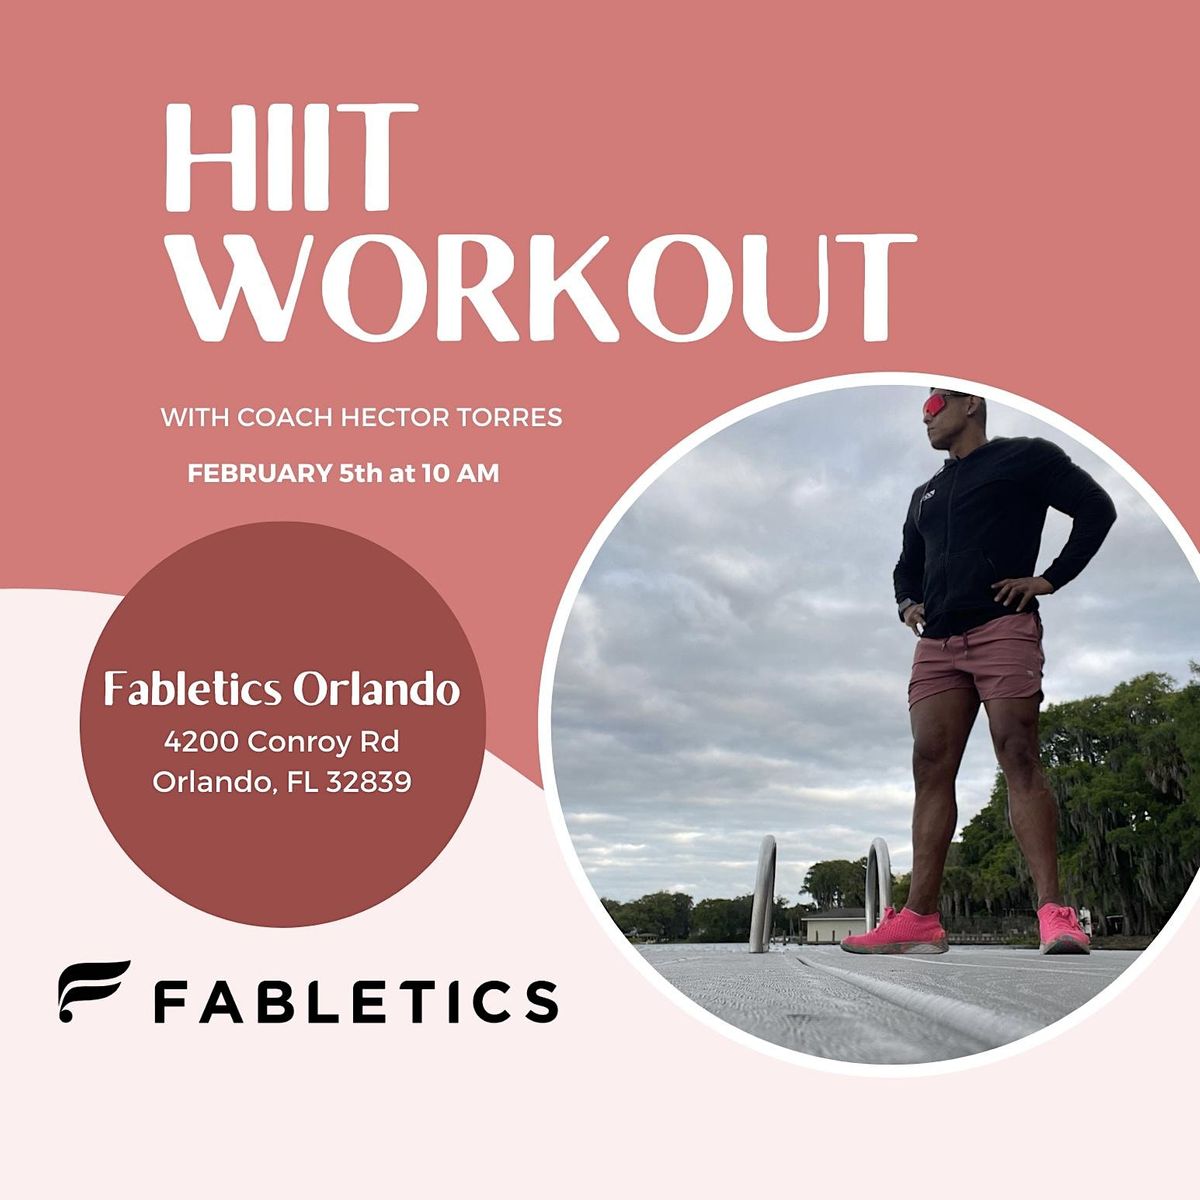 HIIT Workout with Coach Hector Torres